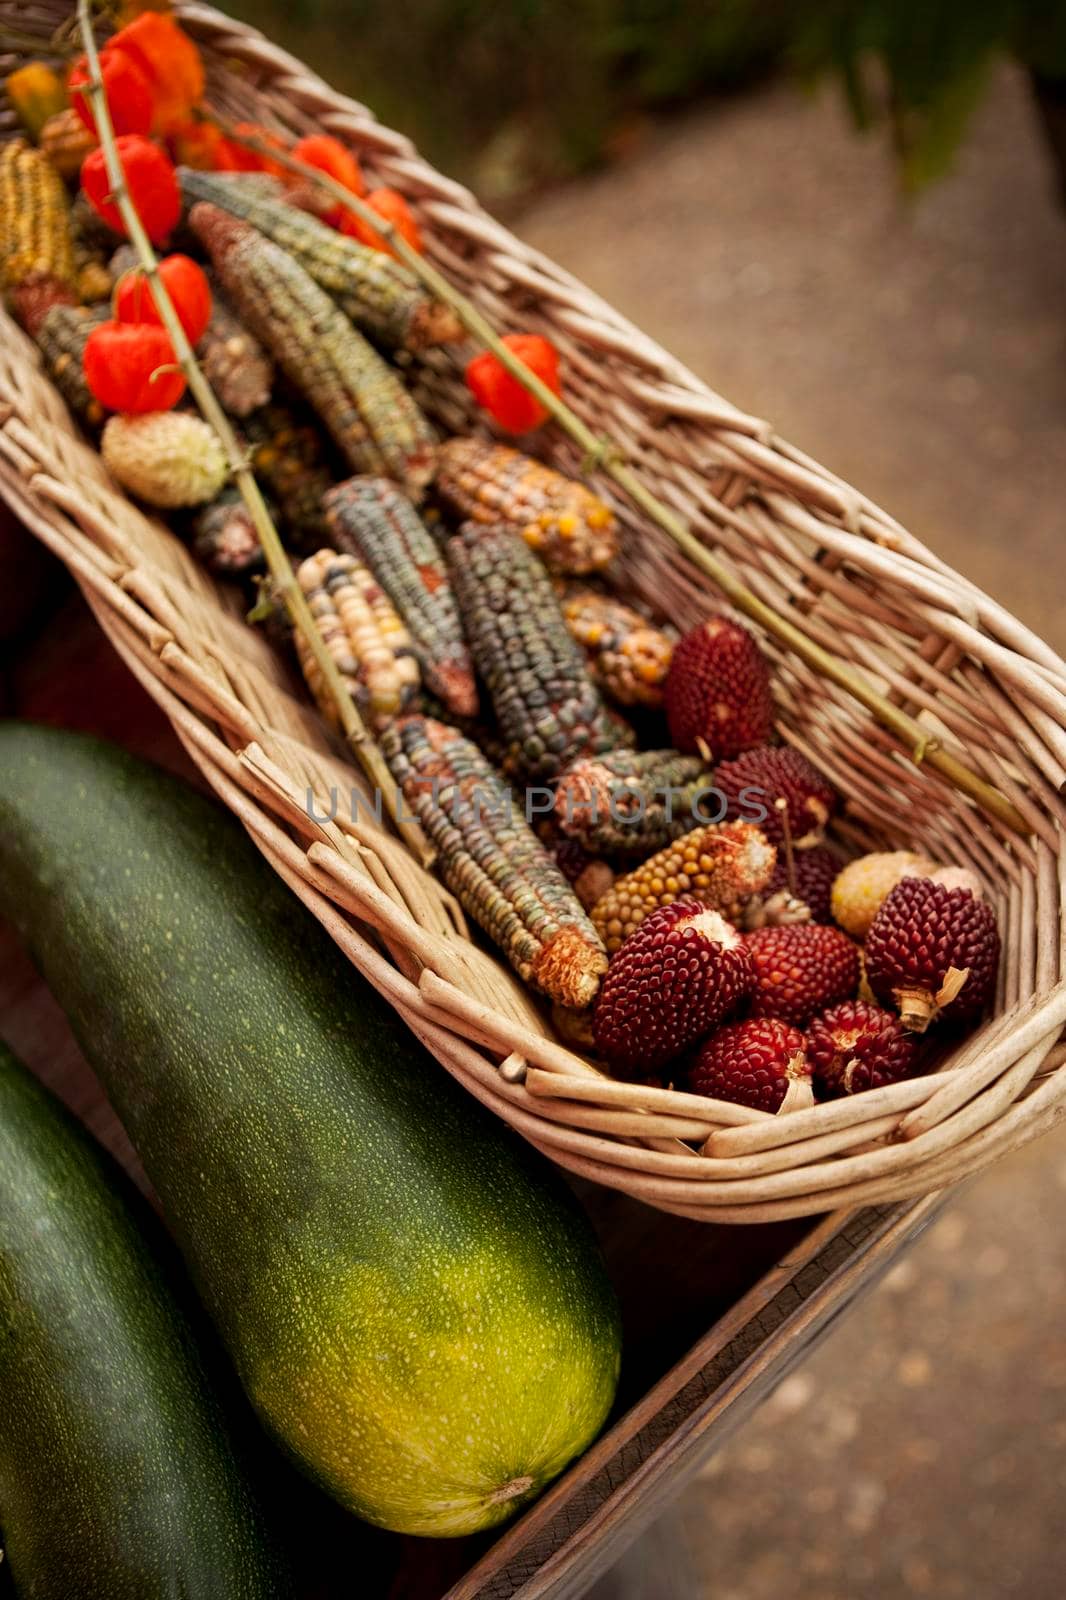 Zucchini, peppers, corn and arbutus berry on a market stall